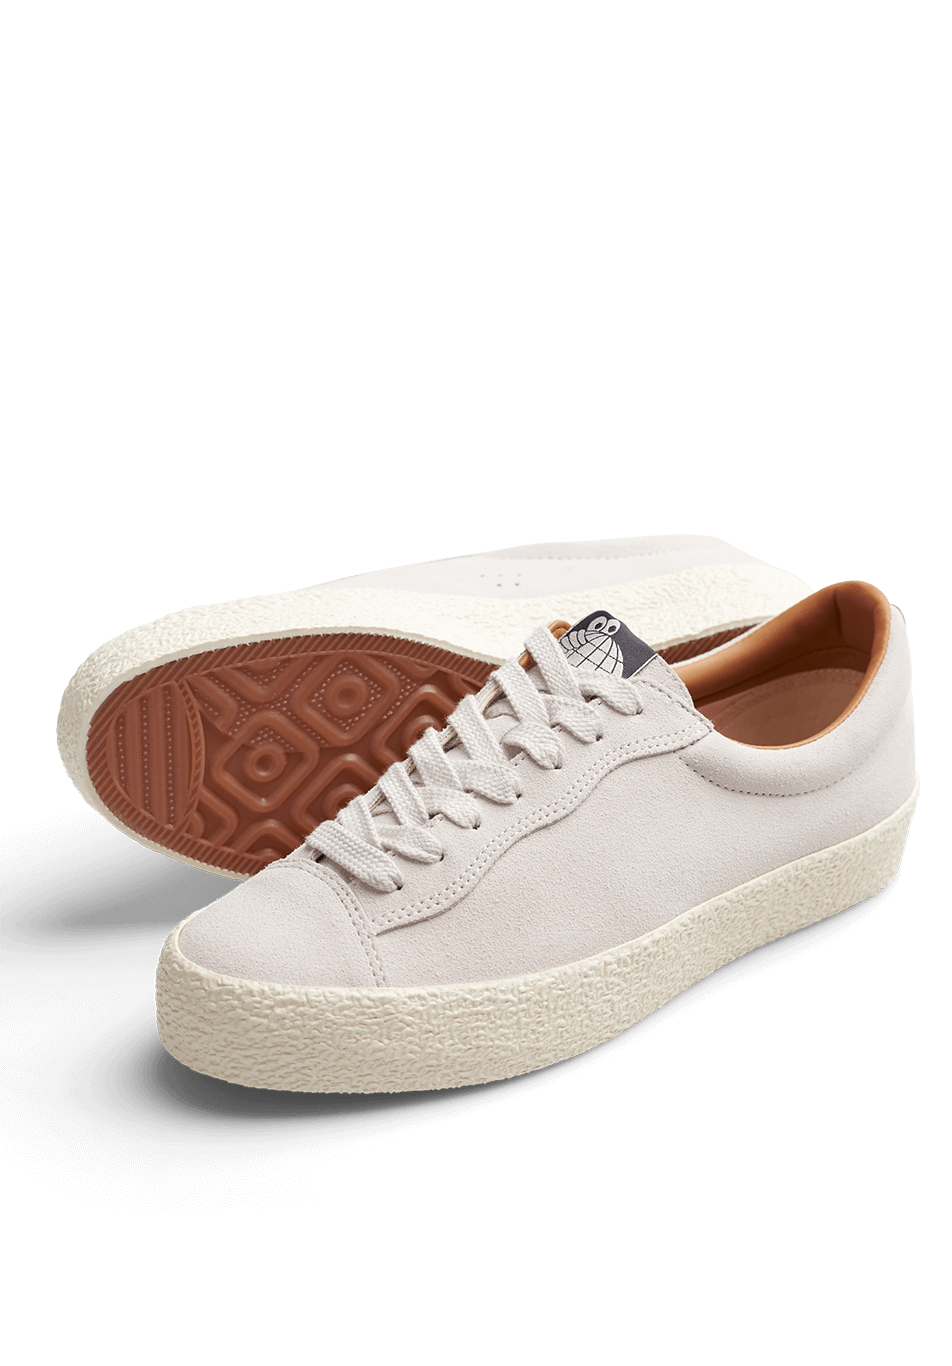 Last Resort AB VM002 Suede Lo All White ONLINE ONLY